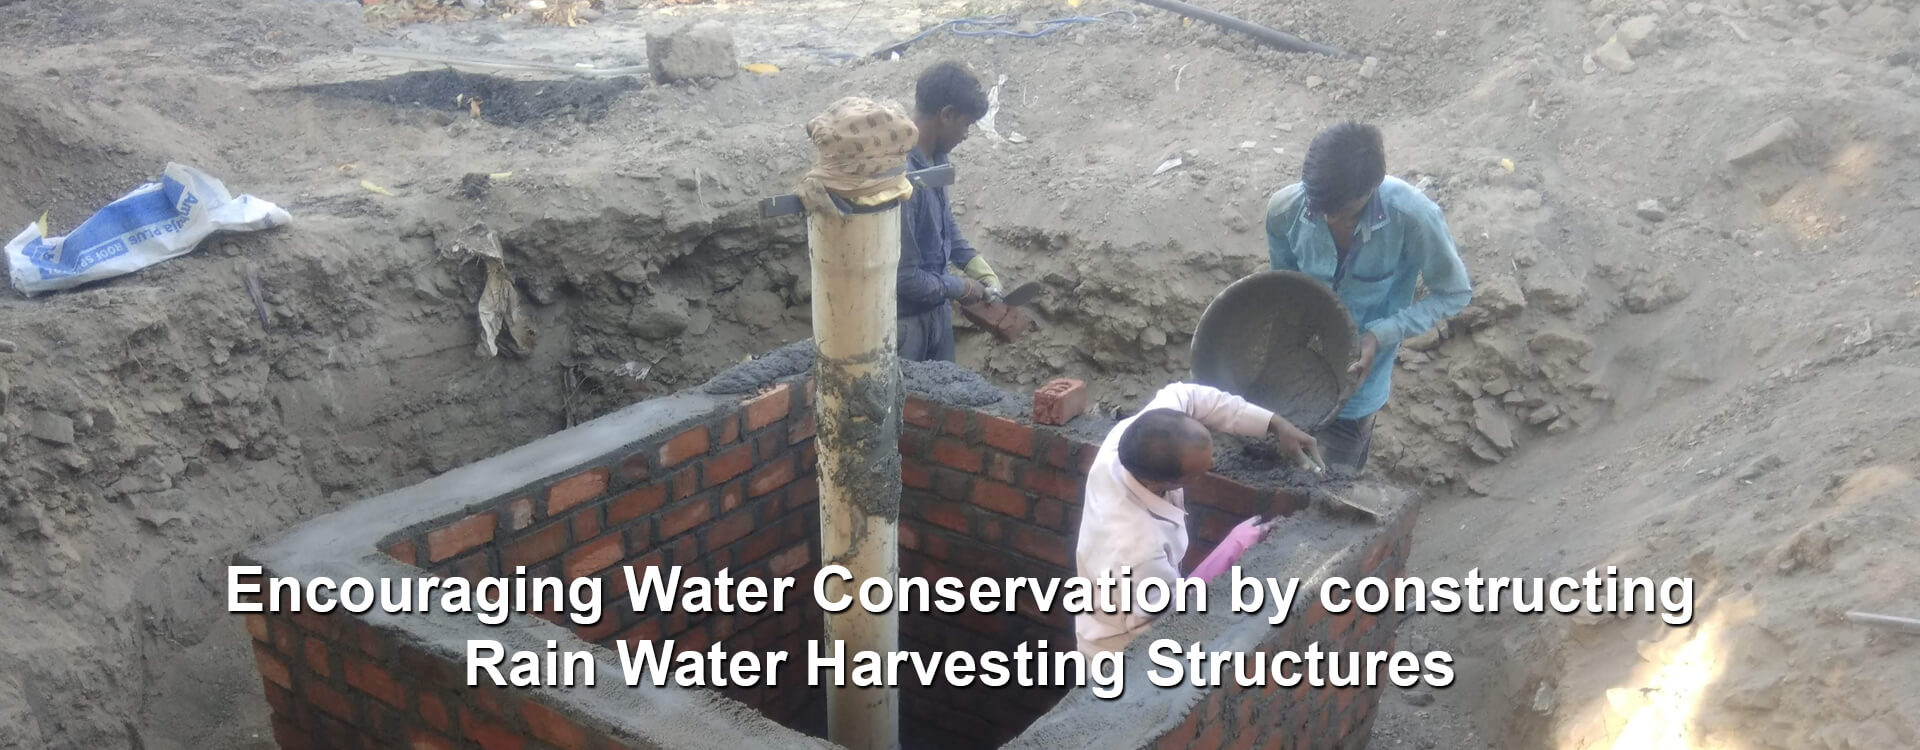 water-conservation-banner